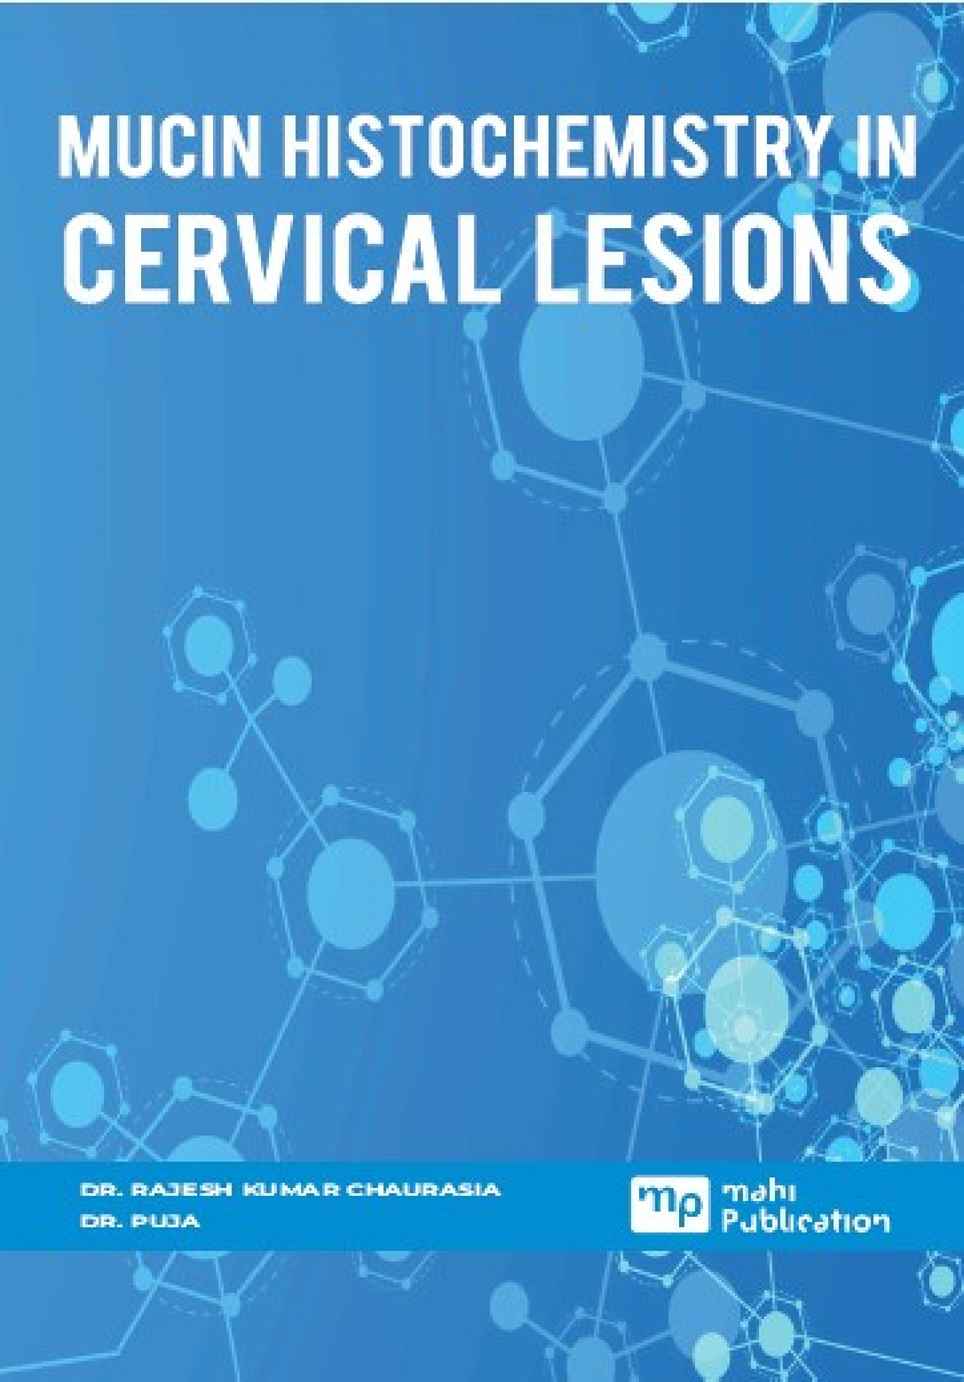 Mucin Histochemistry In Cervical Lesions